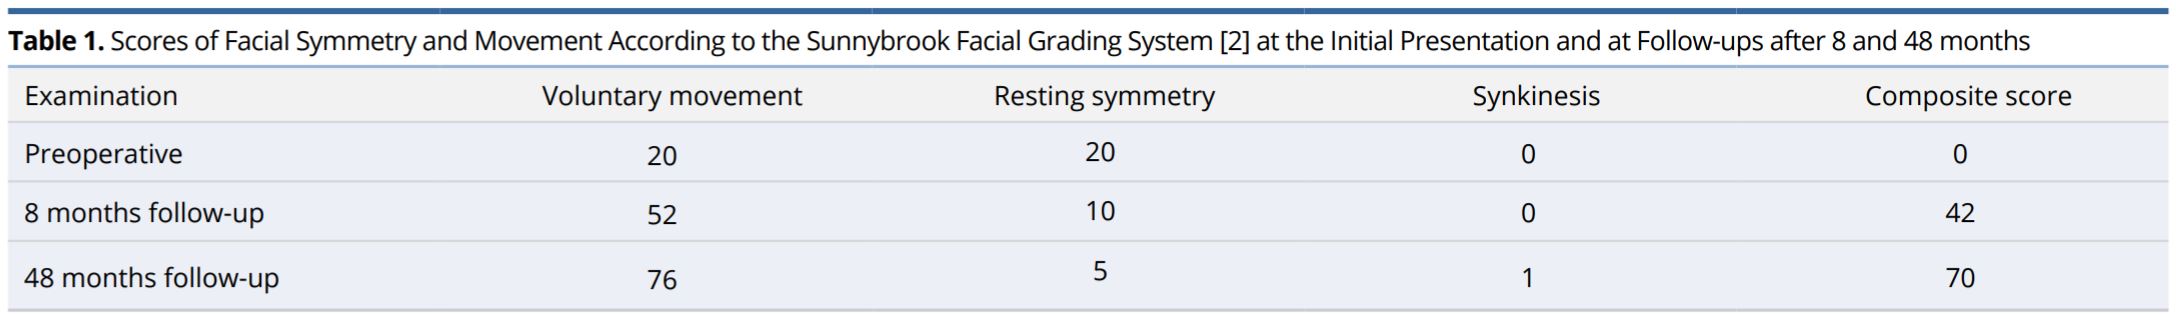 Table 1.JPGScores of facial symmetry and movement according to the Sunnybrook Facial Grading System [2] at the initial presentation and at follow-ups after 8 and 48 months.